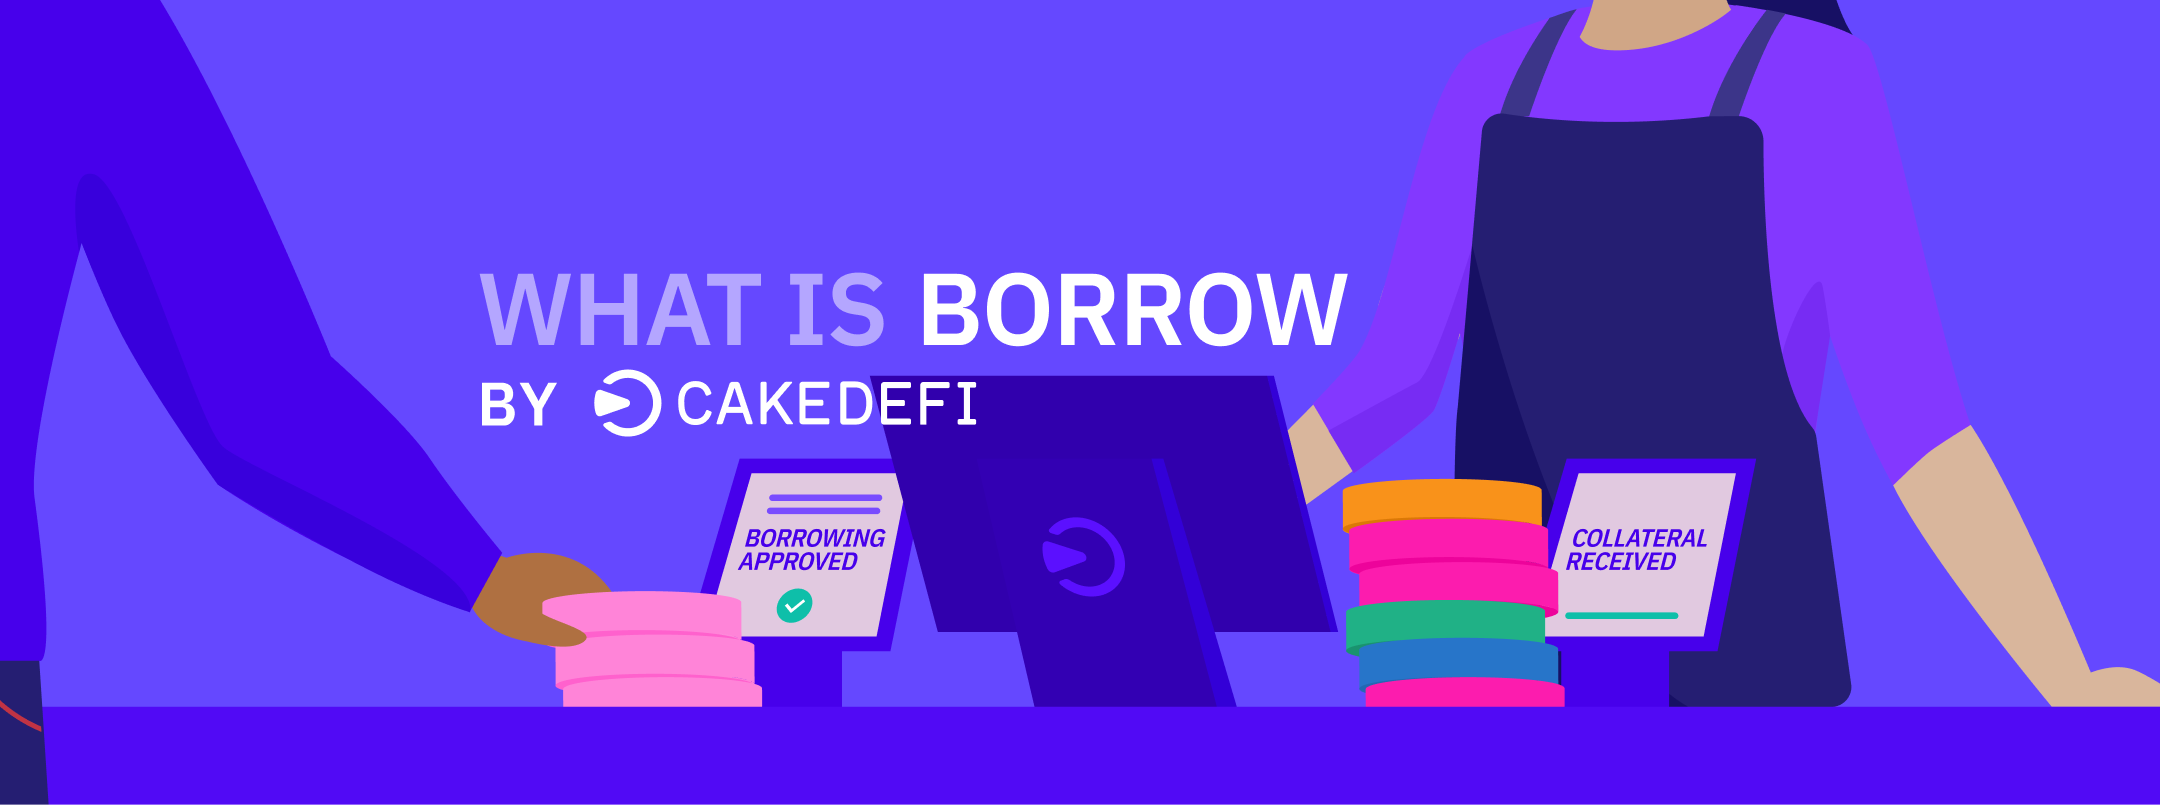 What is “Borrow” by Cake DeFi?